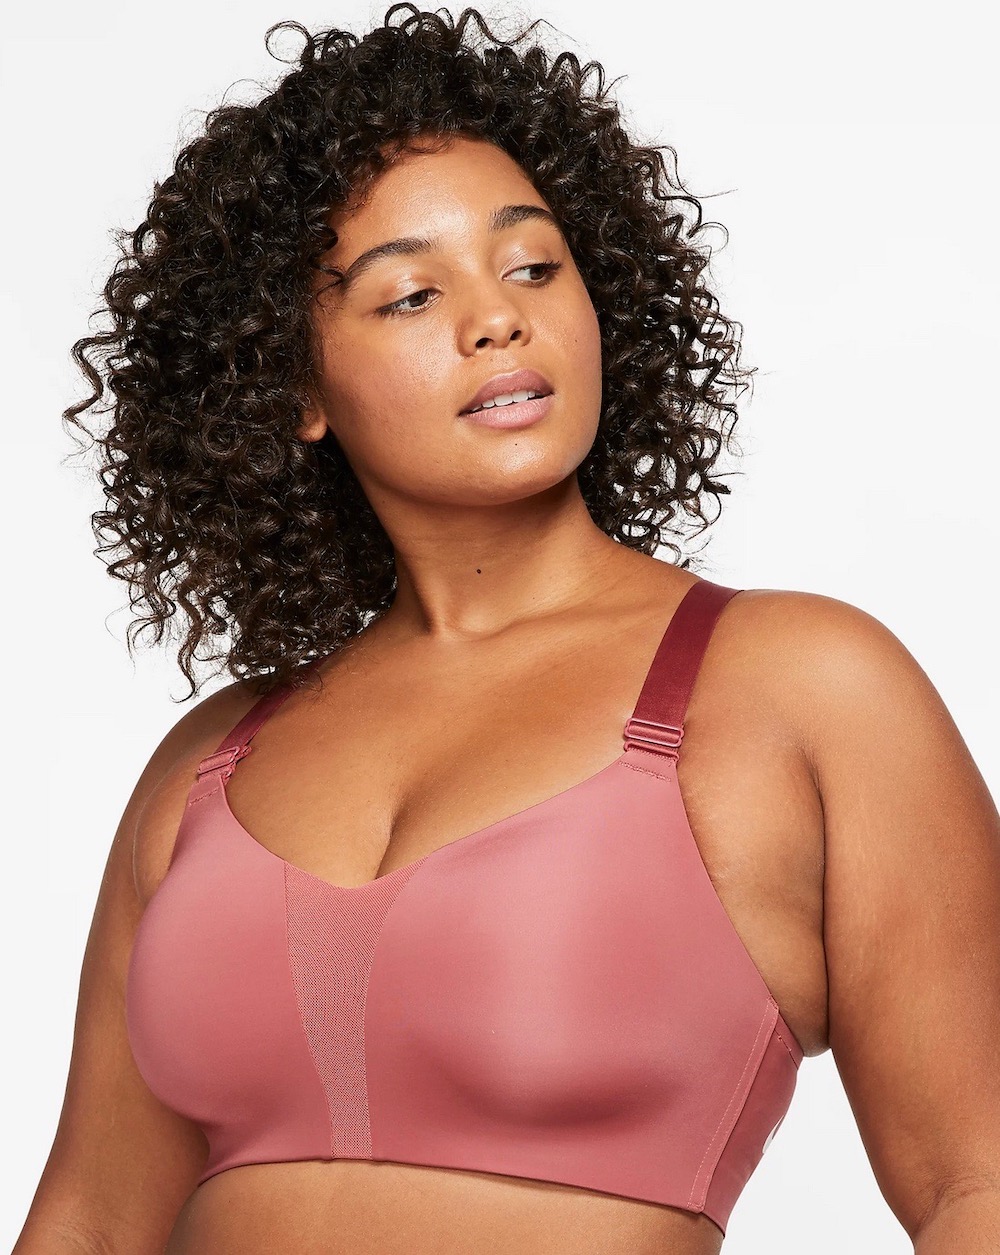 These Are the Best Strapless Bras for Bigger Busts